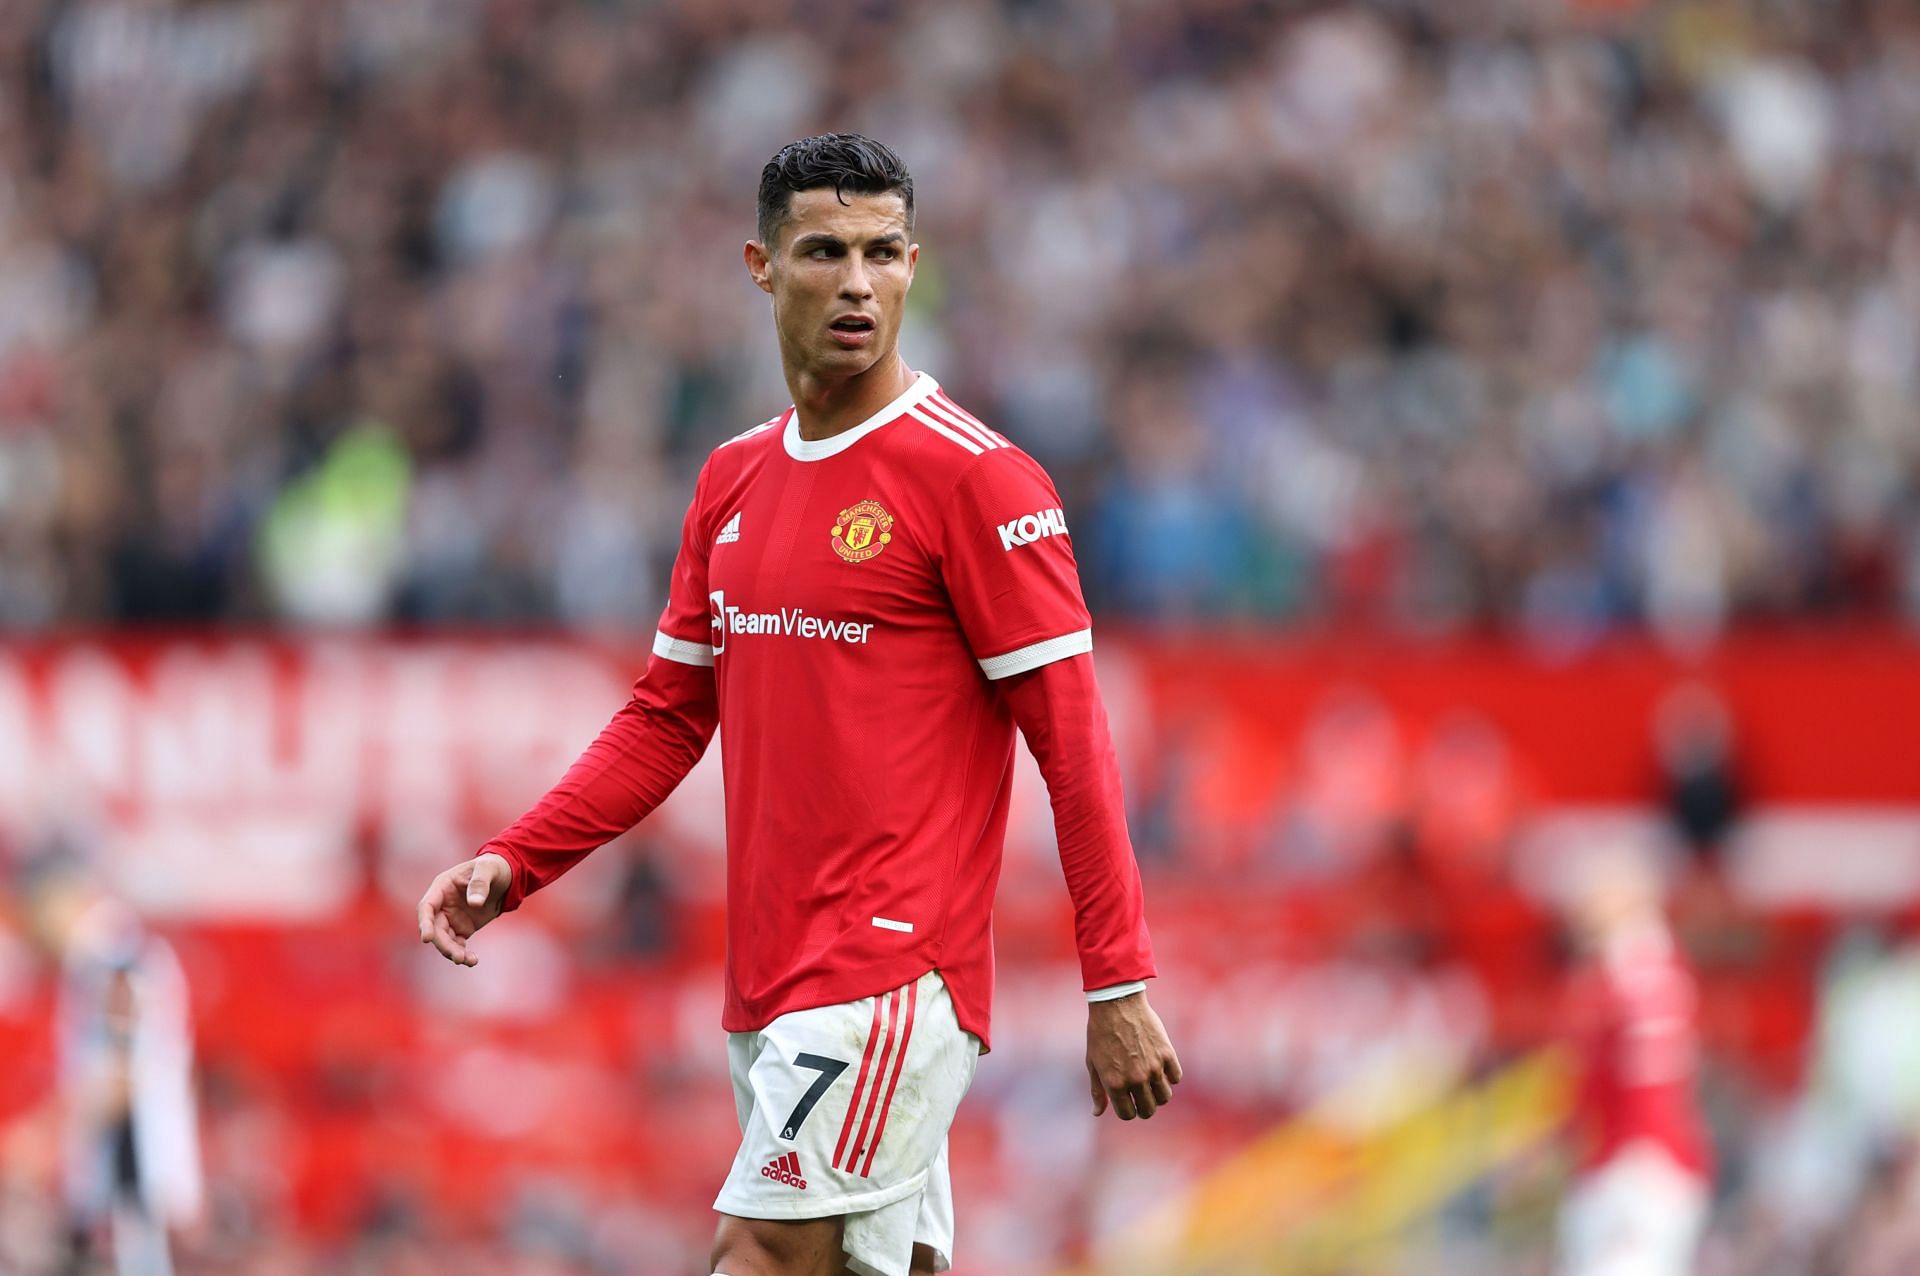 Can Cristiano Ronaldo inspire Manchester United to an upset over Chelsea tonight?